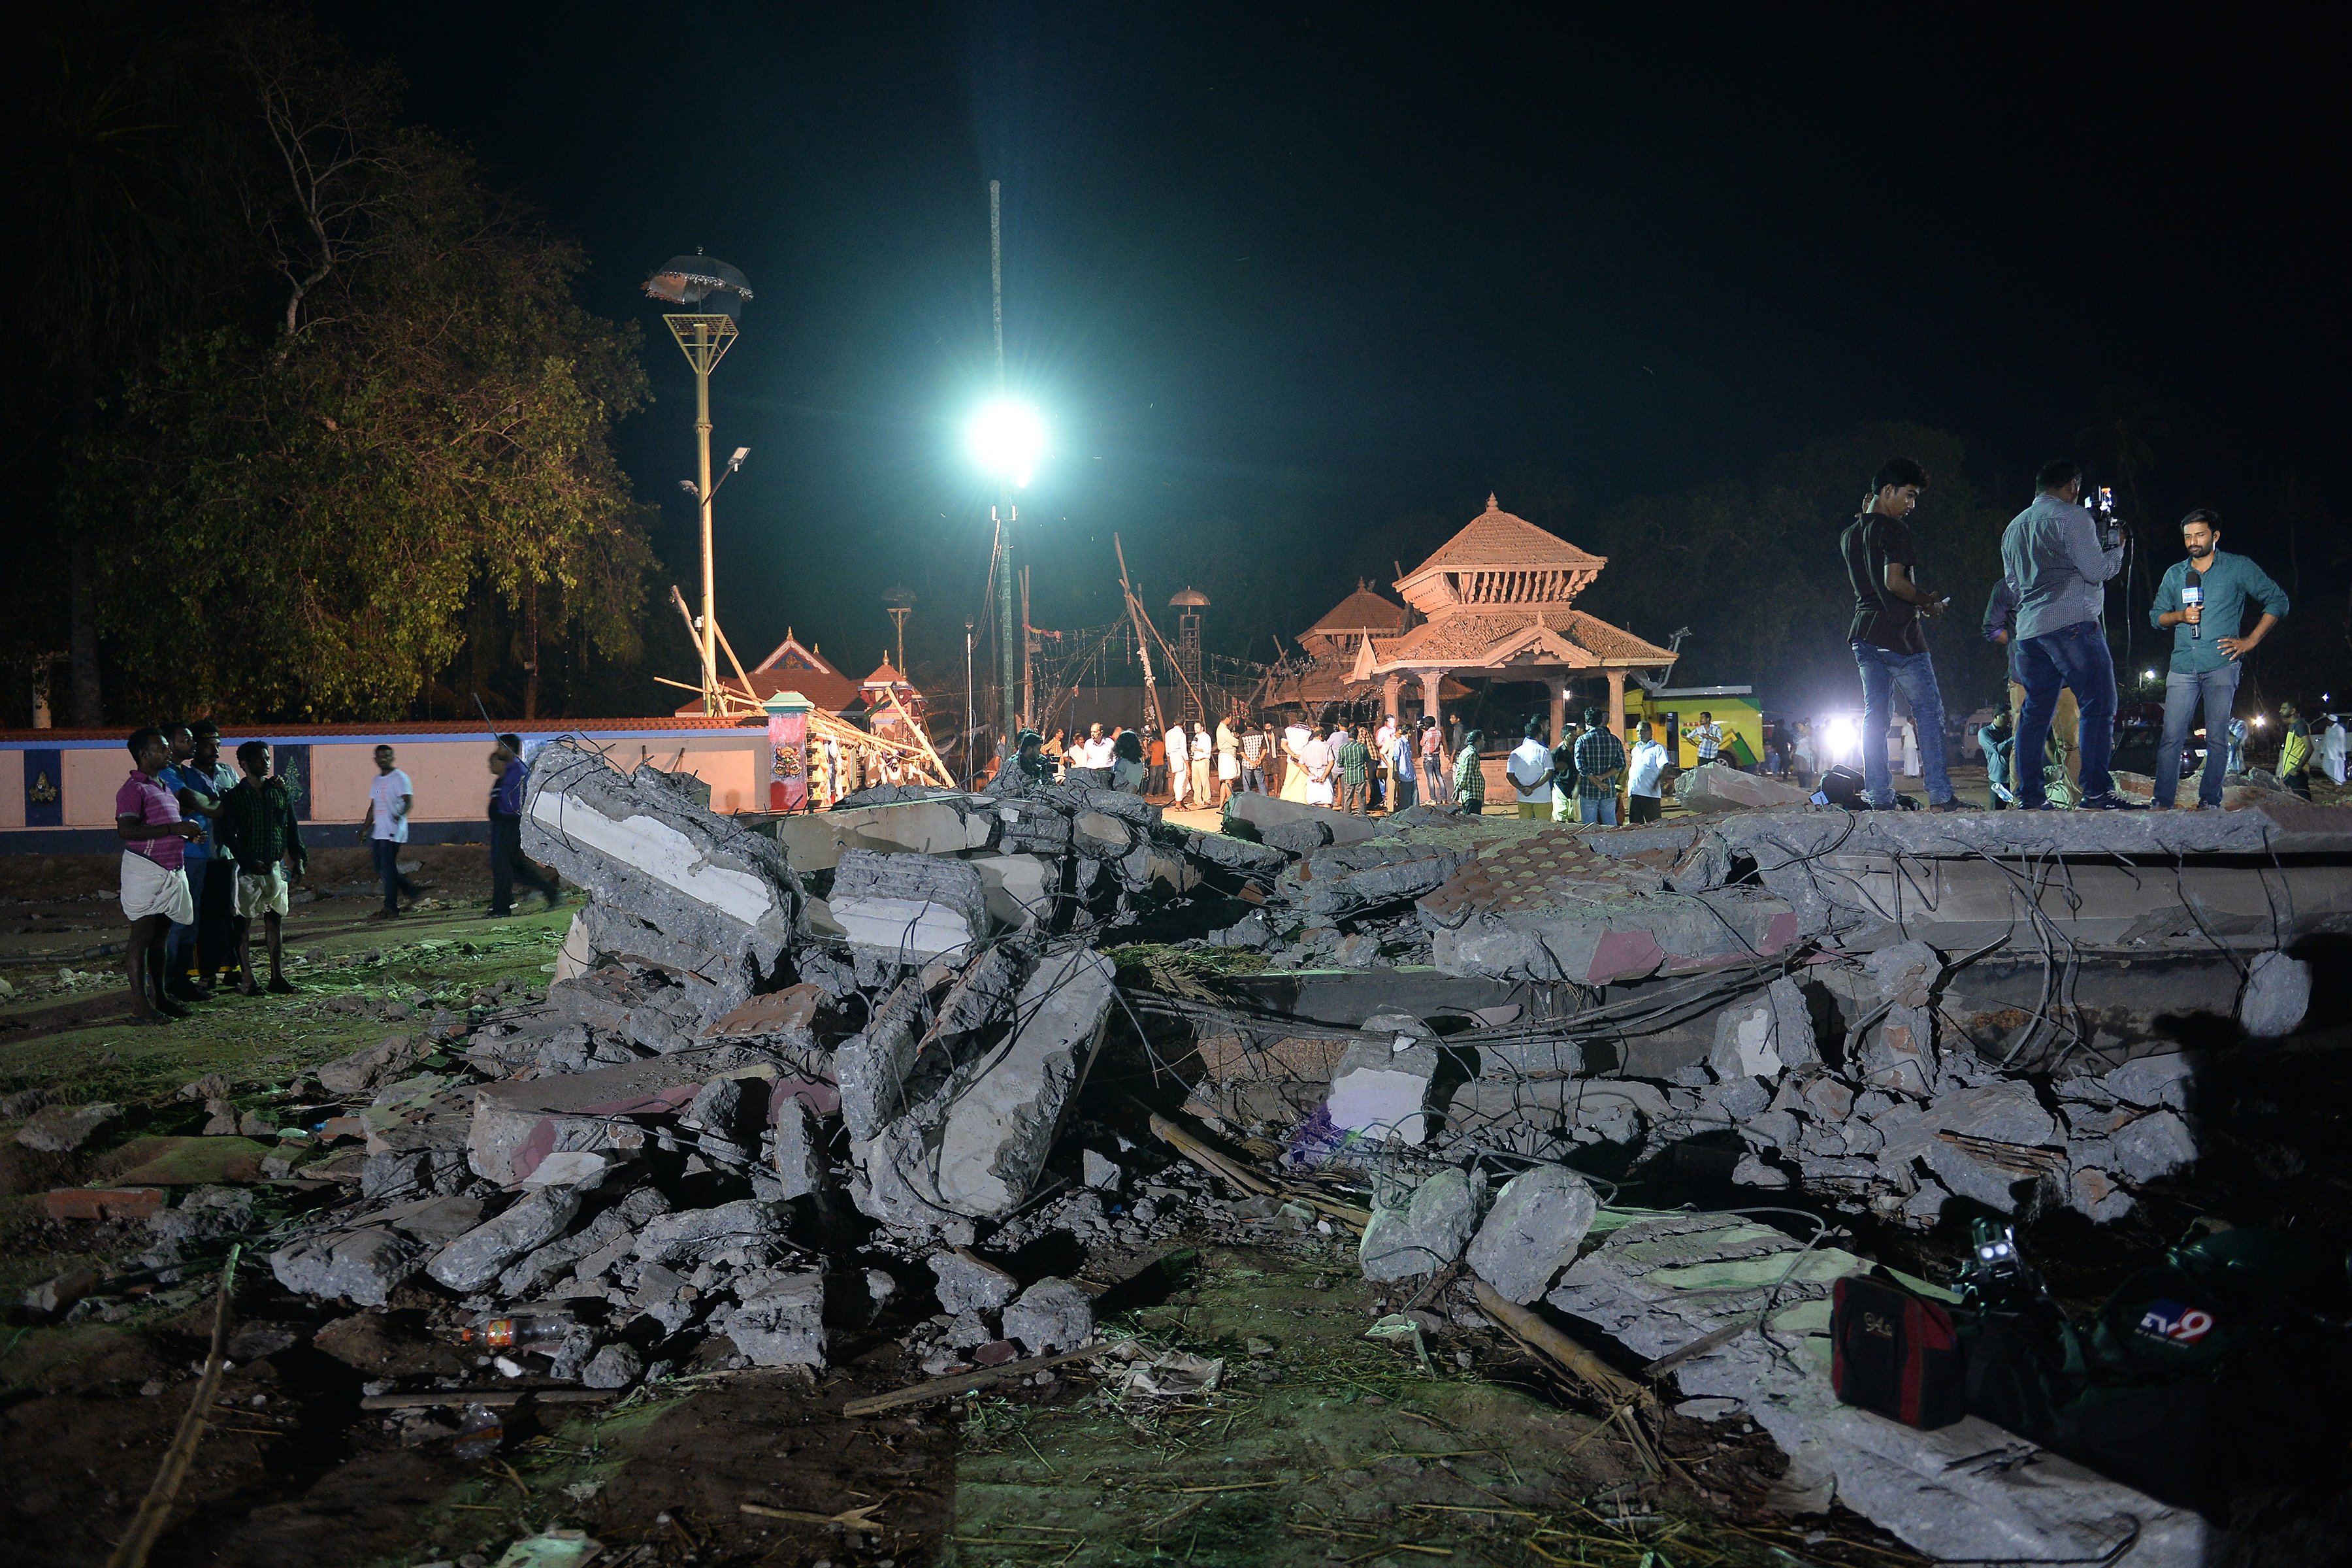 Onlookers stand amid the debris in the aftermath of the deadly fire explosion that rocked Puttingal Temple in Paravoor, nearly 40 miles (60 km) northwest of Thiruvananthapuram in Kerala state, India, on April 10, 2016 (Manjunath Kiran—AFP/Getty Images)